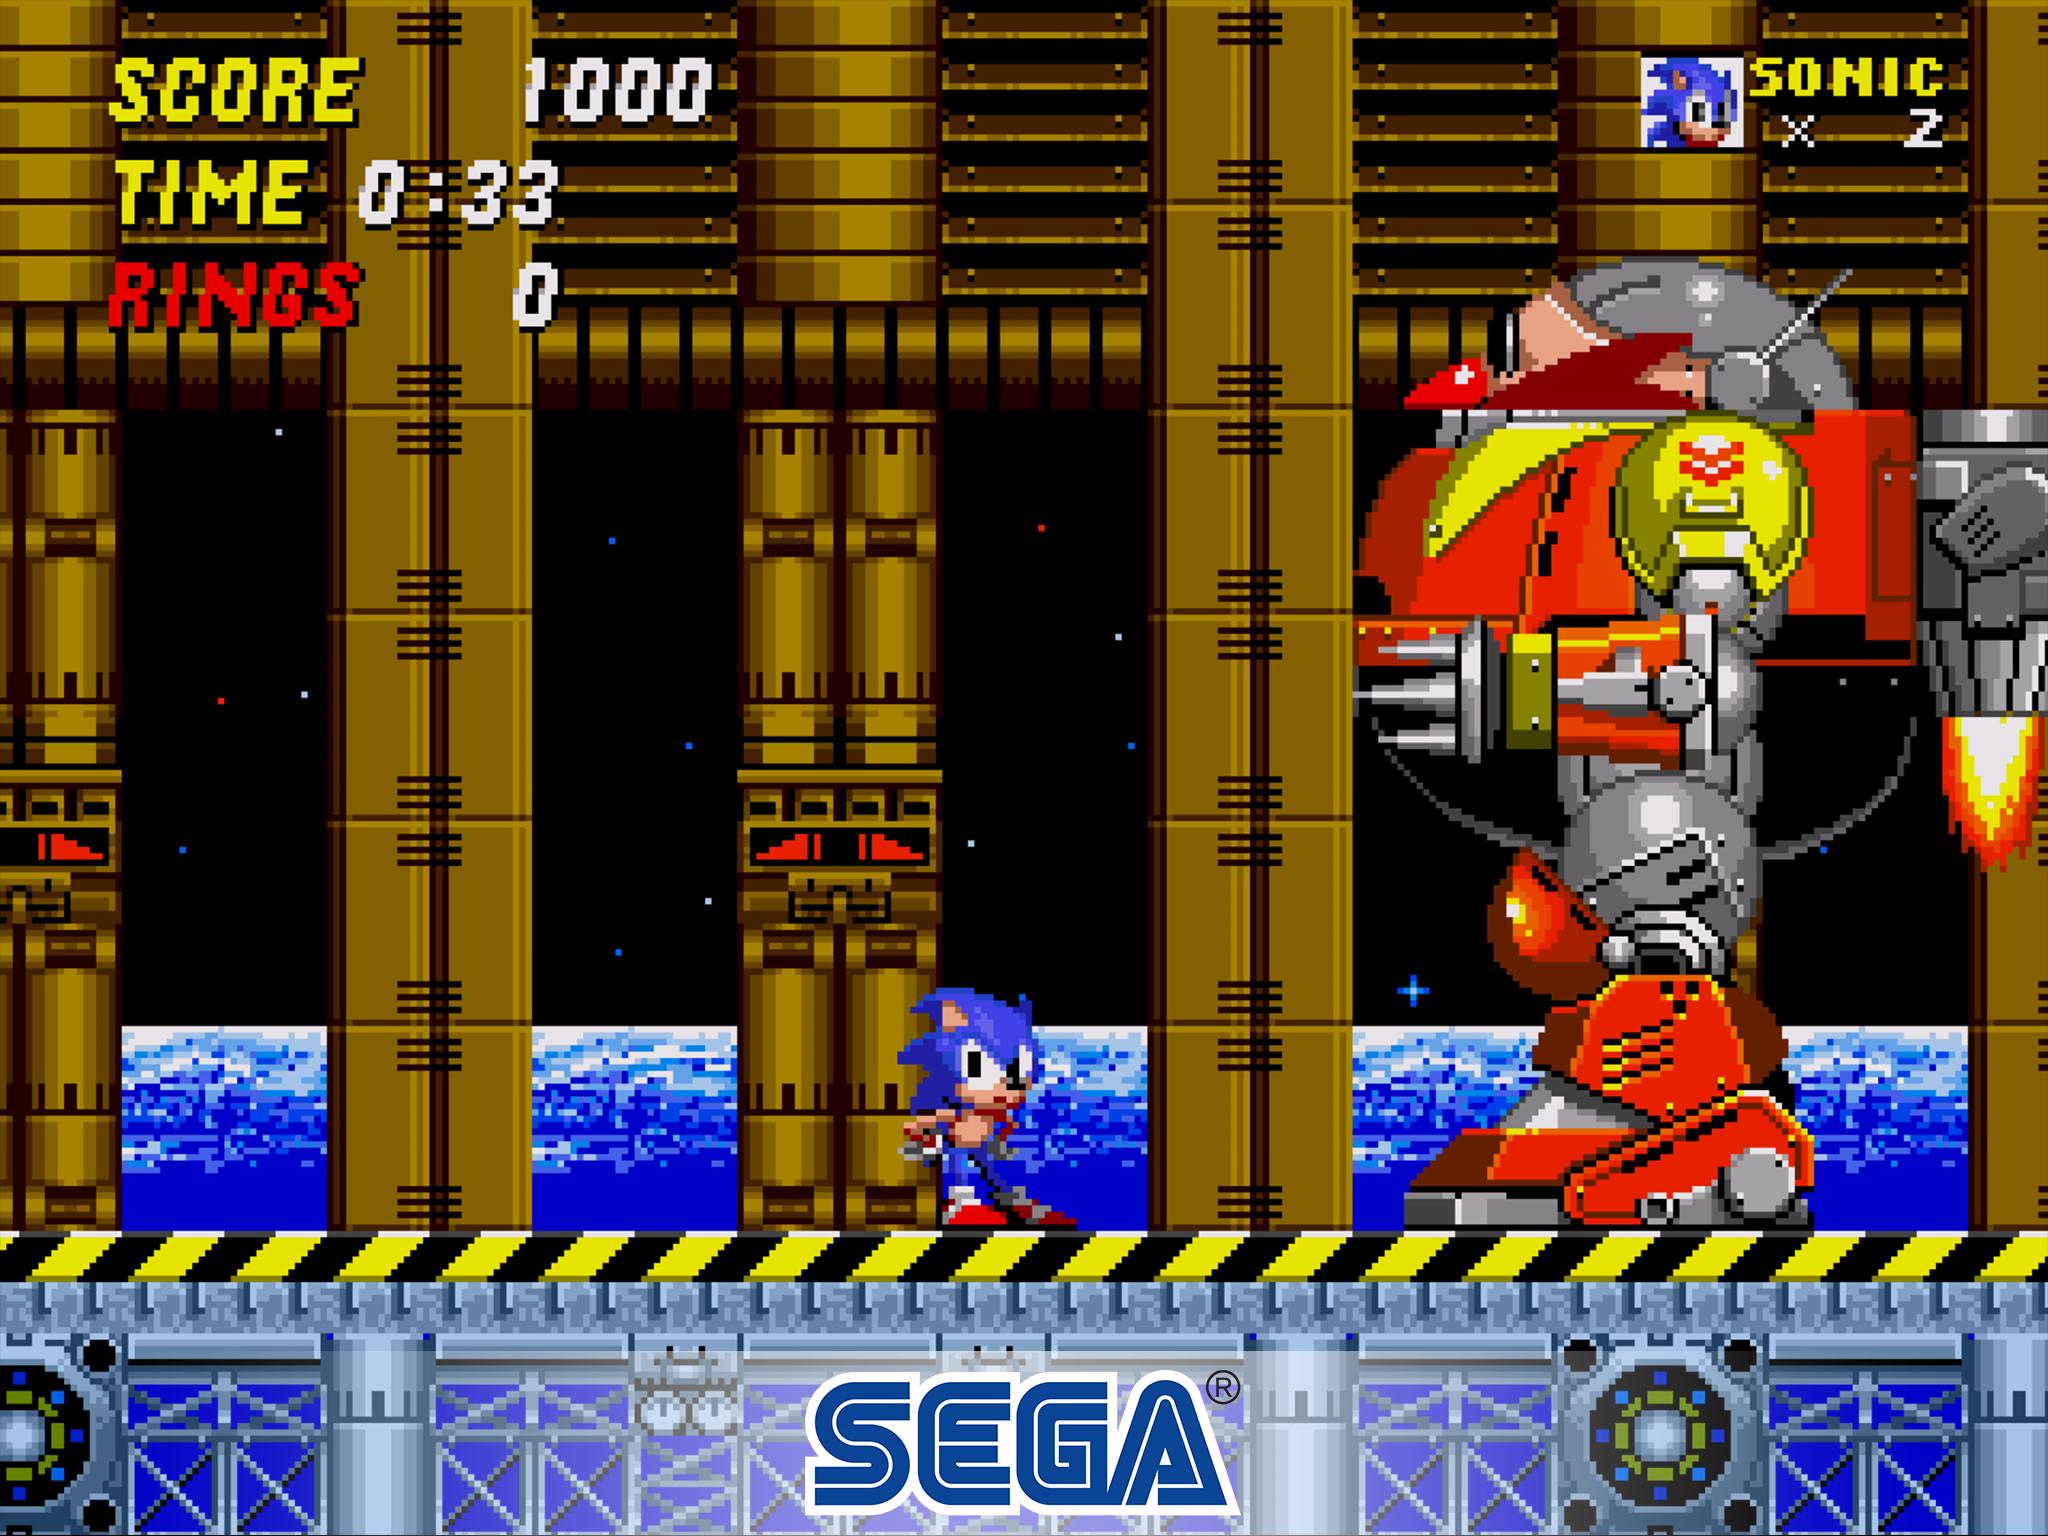 bad moments in great games - Sonic the Hedgehog 2: Giant Robot Fight